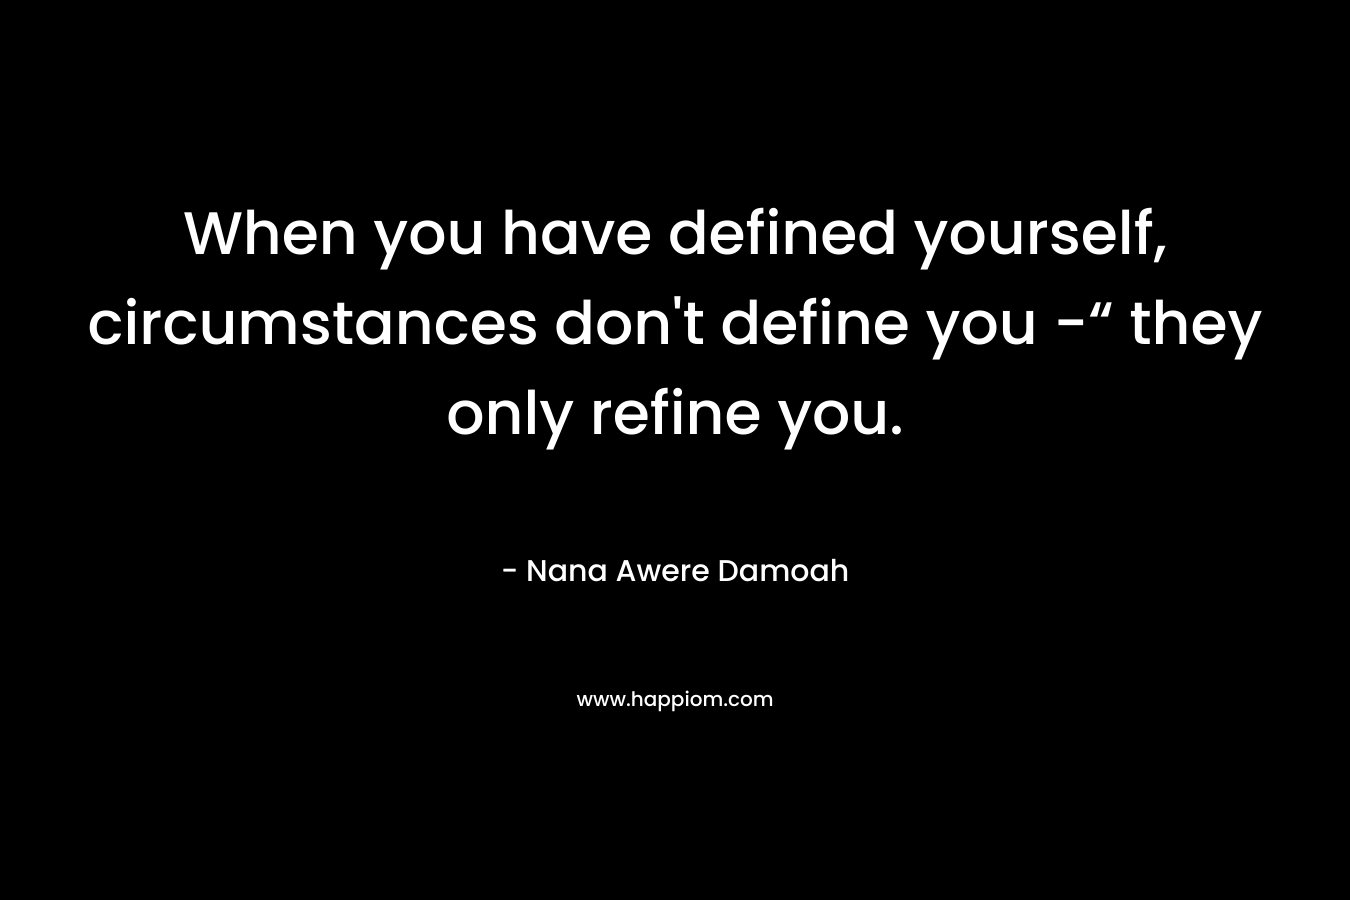 When you have defined yourself, circumstances don't define you -“ they only refine you.